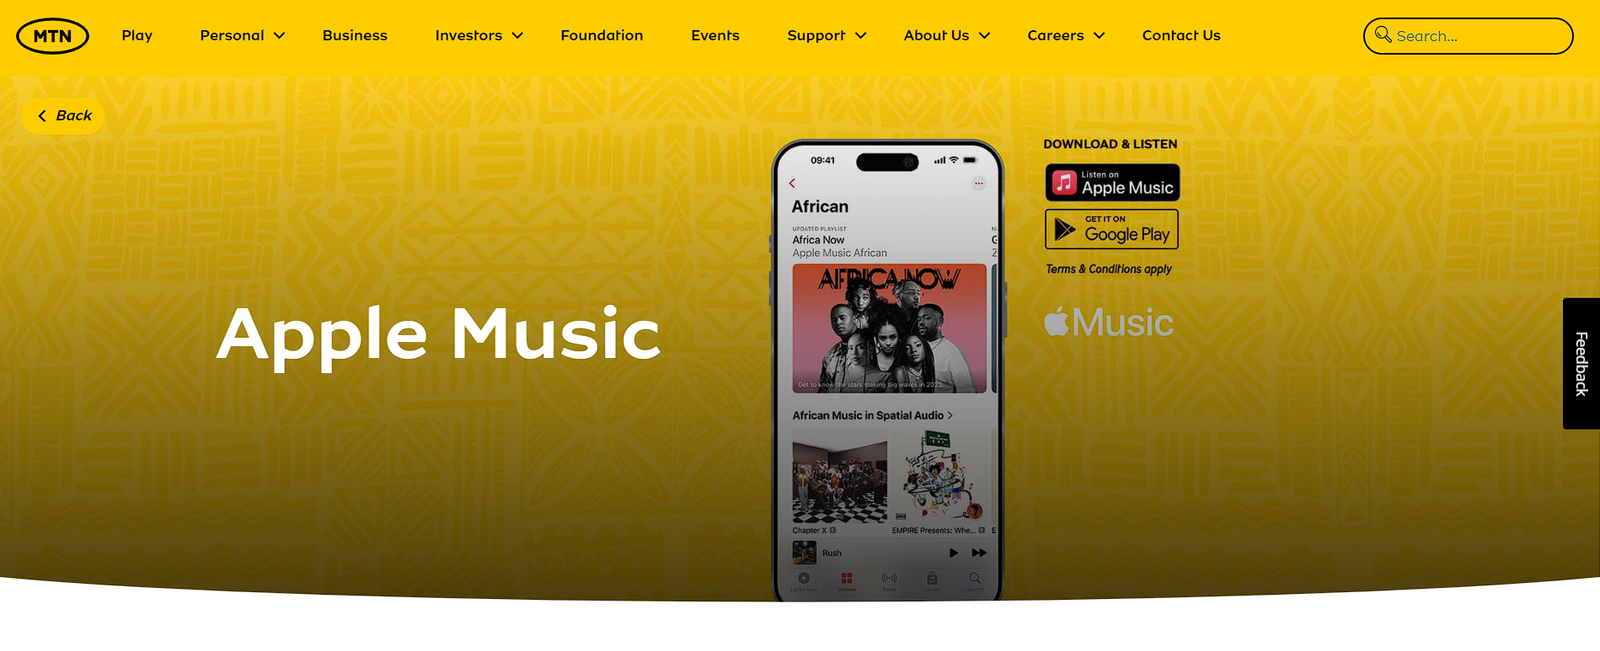 MTN partners with Apple Music